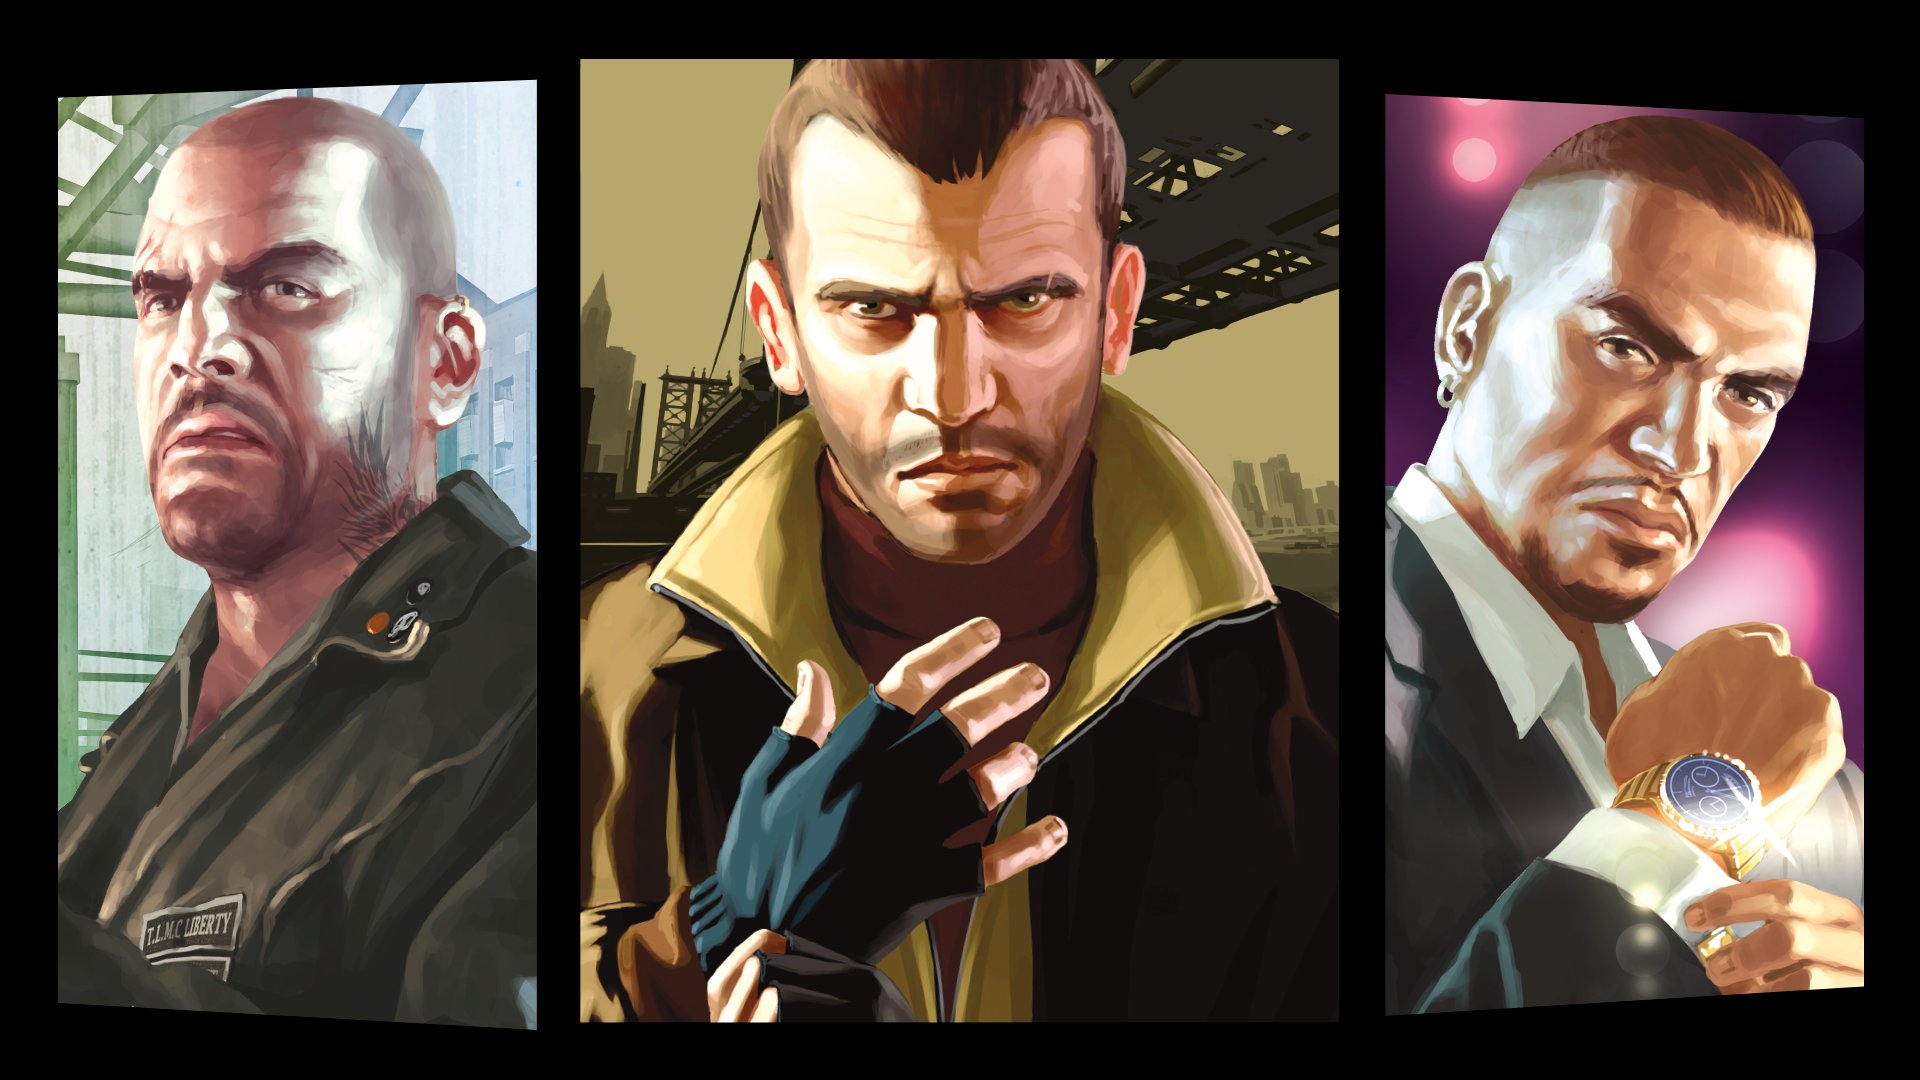 Grand Theft Auto IV: Complete Edition on Steam